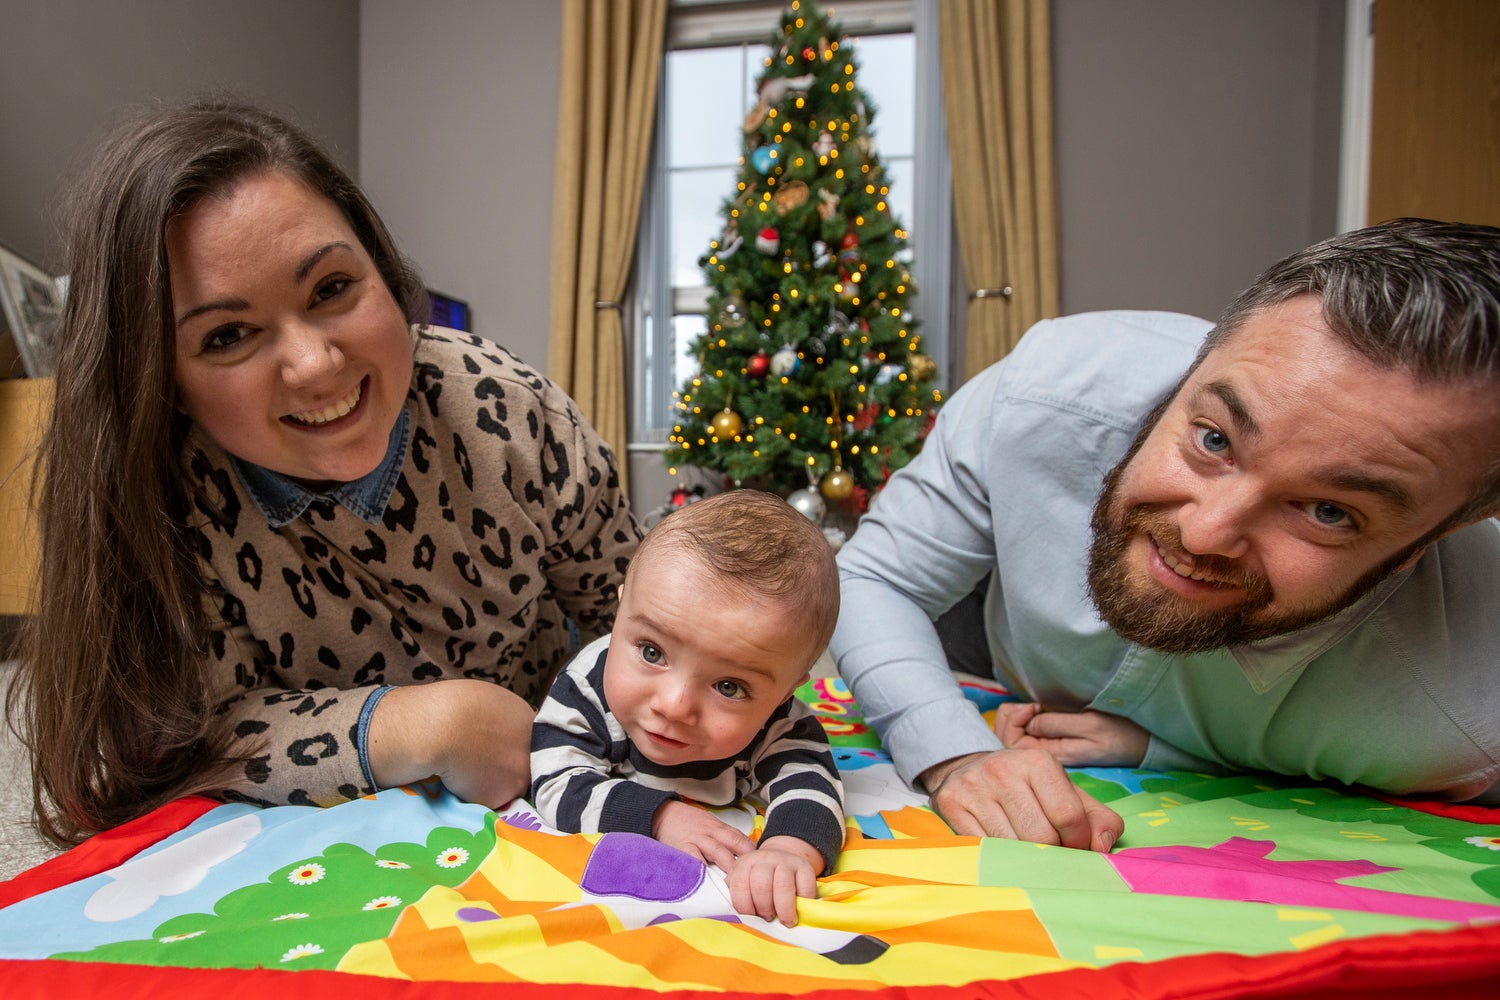 Martin and Gillian Johnston with their son Robert “Robbie’ Johnston at their home in Ballyclare, Northern Ireland. PA Photo. Picture date: Tuesday December 21 2021. See PA story ULSTER Baby. Photo credit should read: Liam McBurney/PA Wire